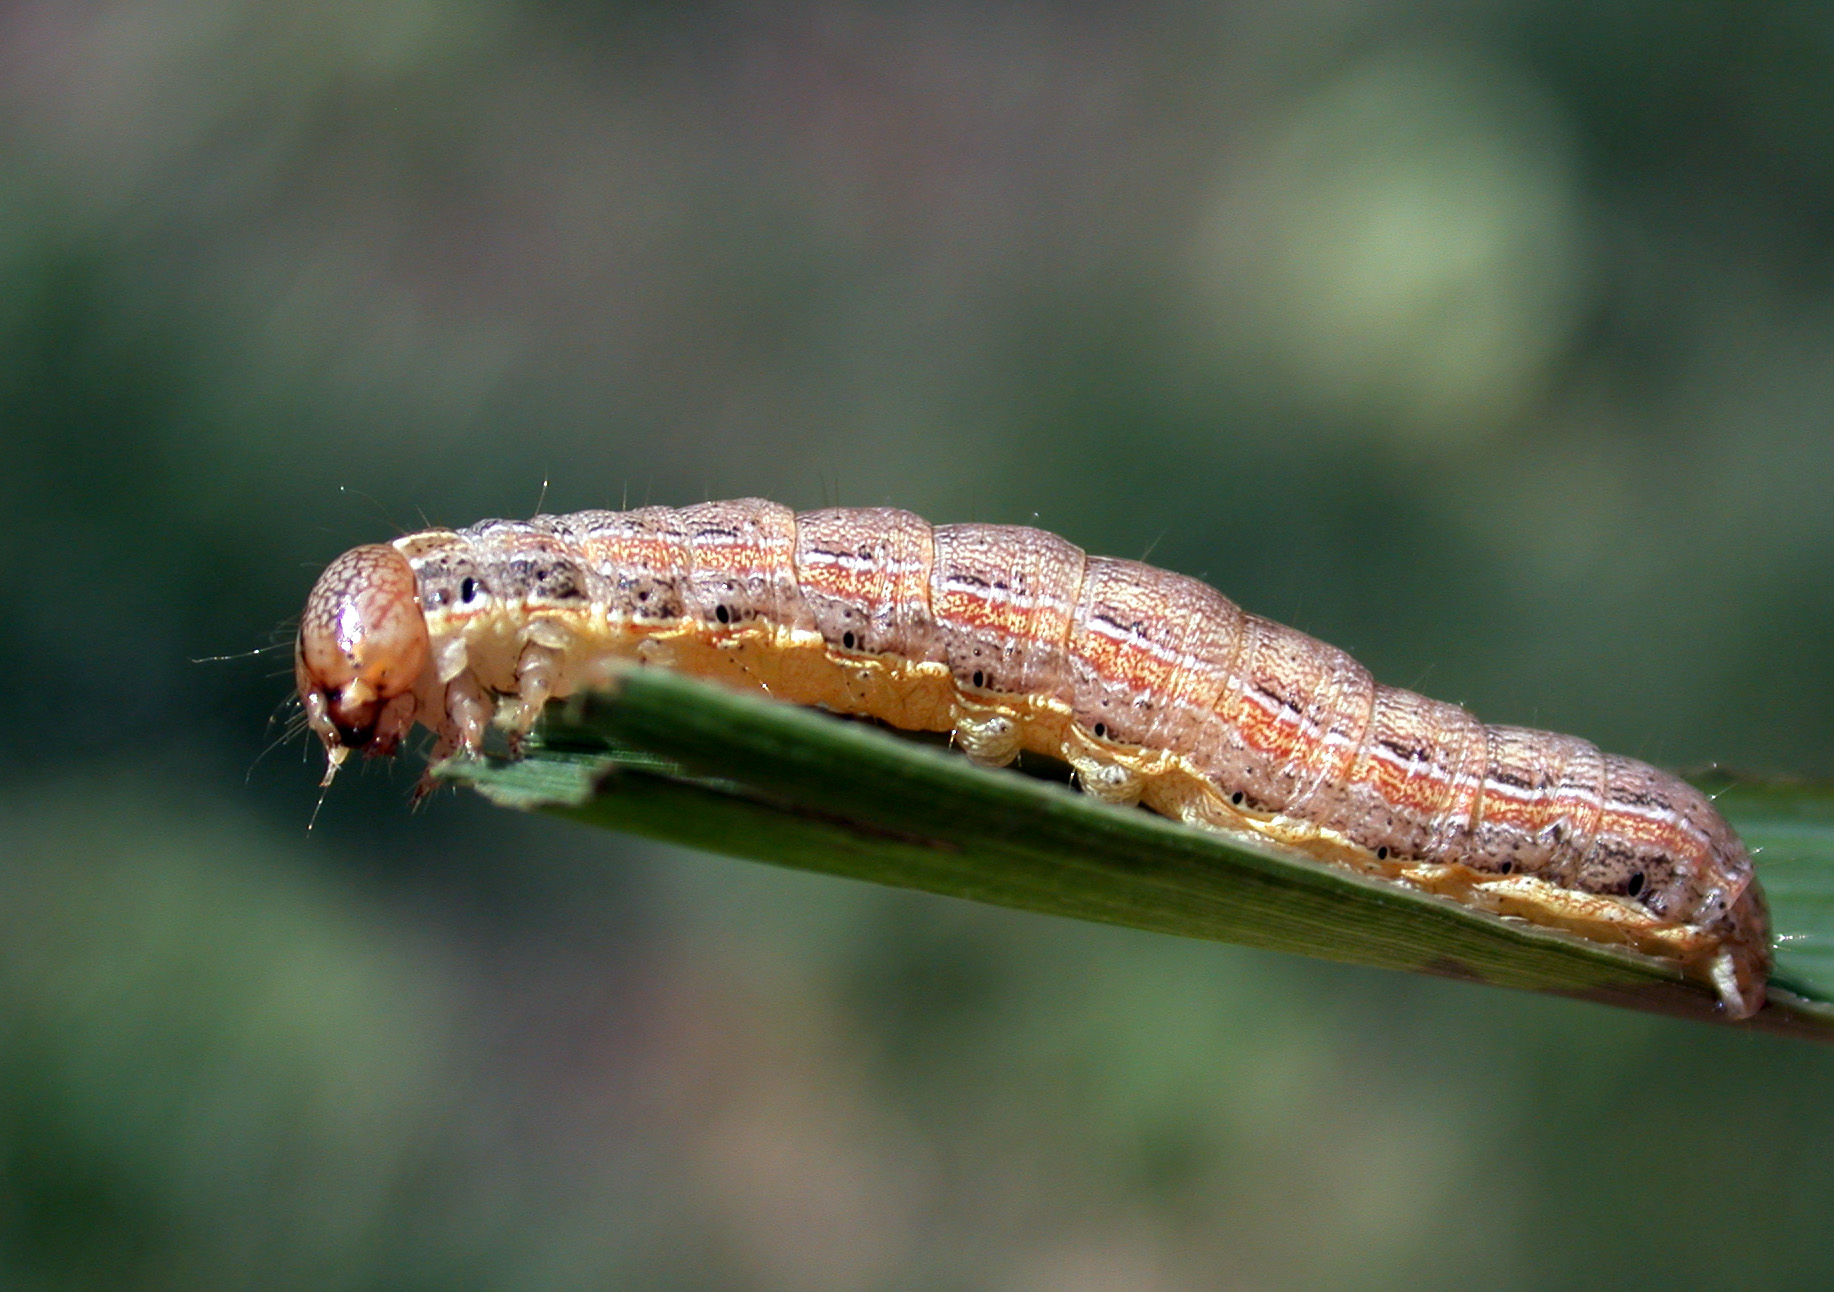 Armyworm larva on a blade of grass